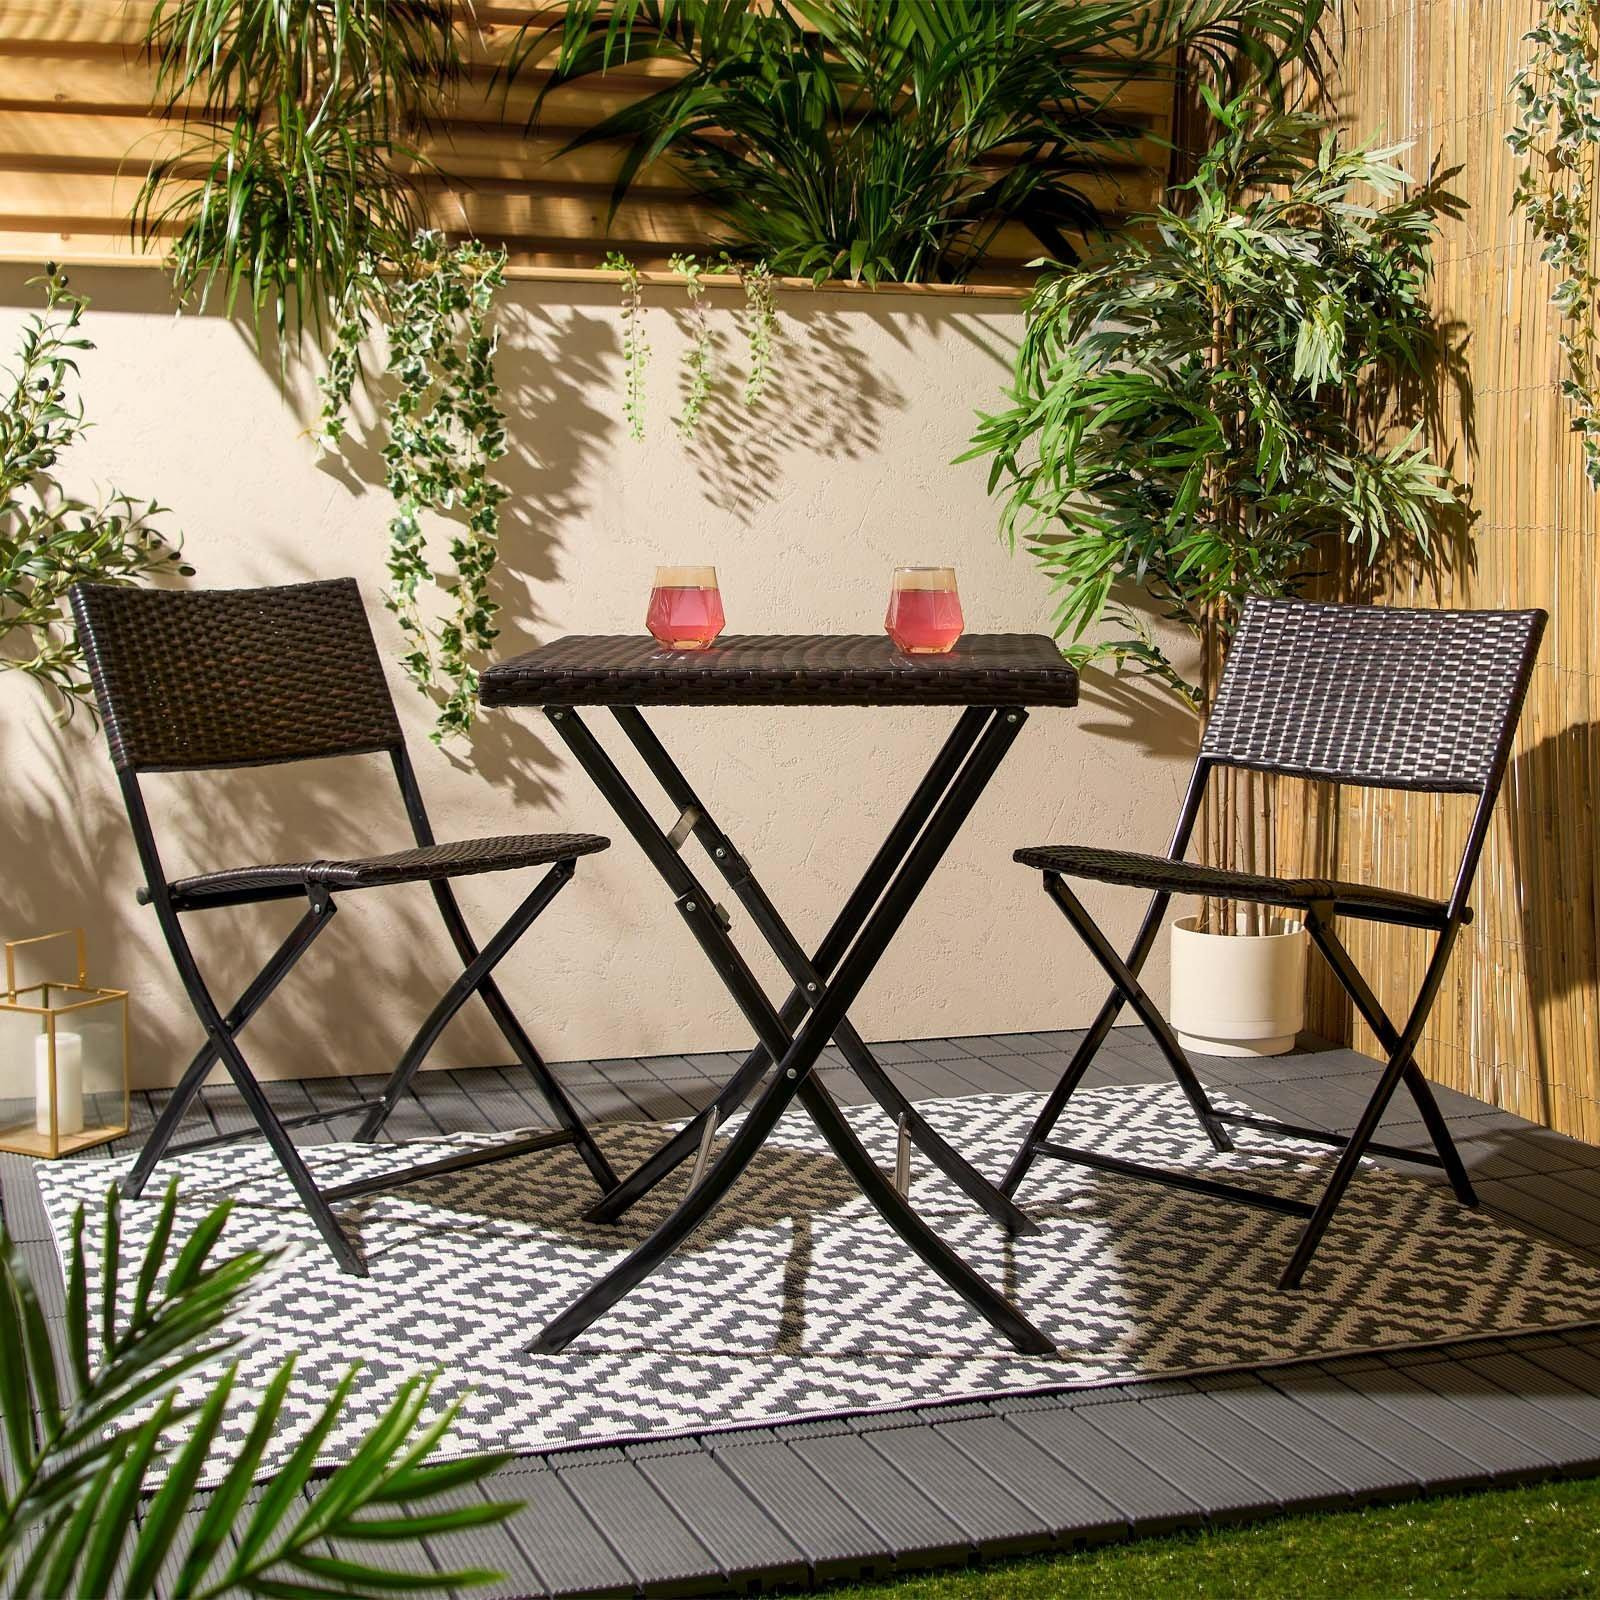 3 Set Metal Bistro Chair And Table Set Garden Patio Seating - image 1